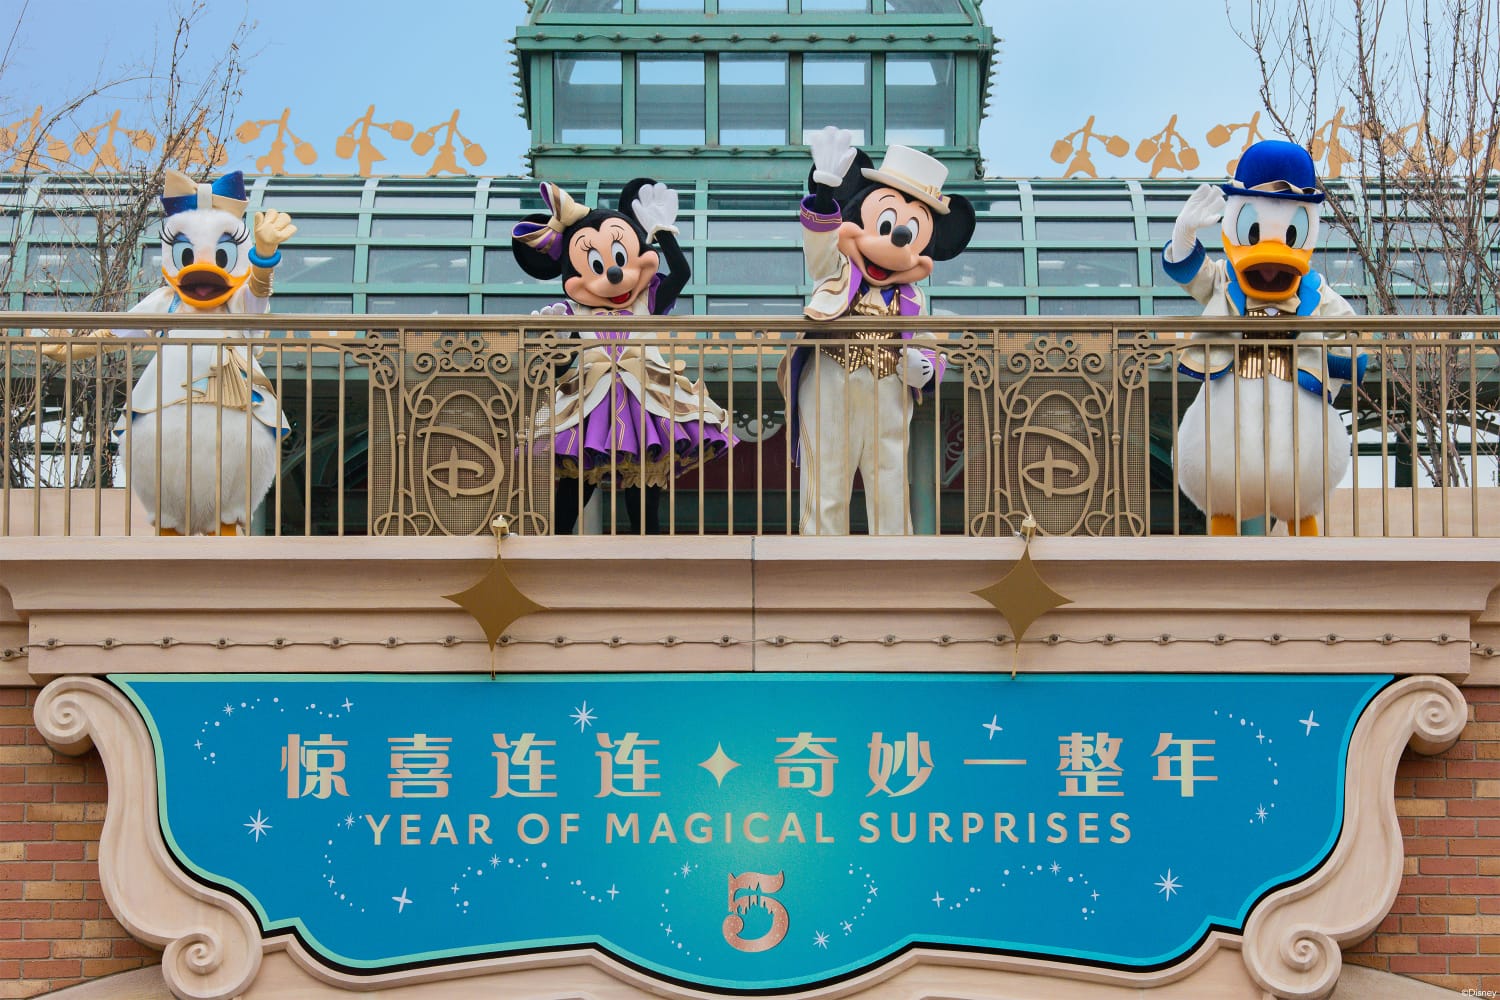 Shanghai Disney Resort - 5th Anniversary - Welcome by Donald Mickey Daisy and Minnie